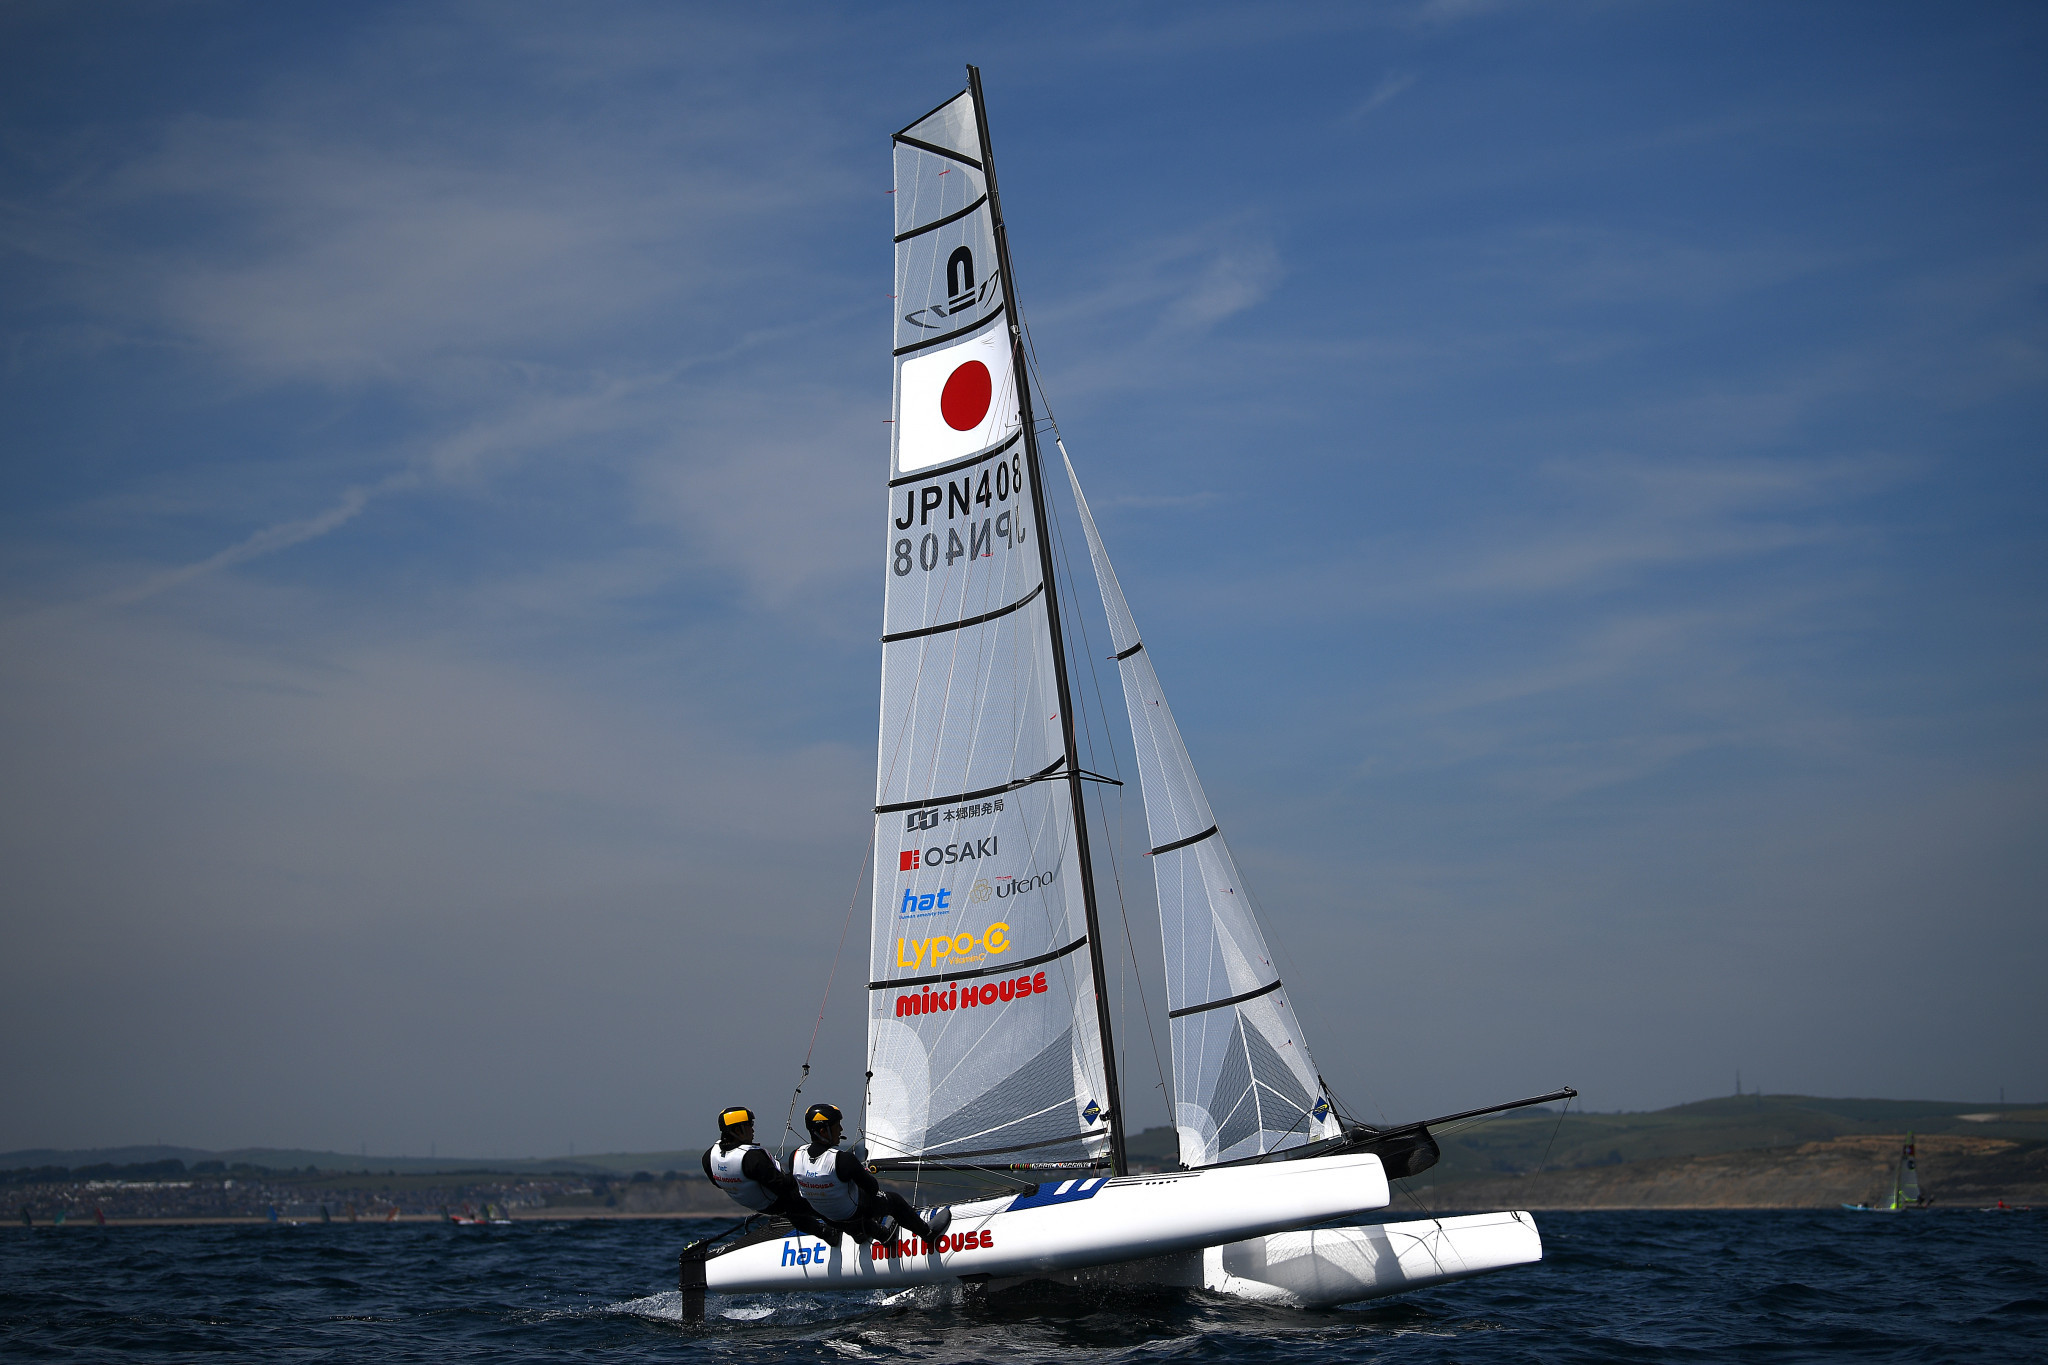 Coronavirus prompts move of Asian Olympic sailing qualifiers from China to Italy